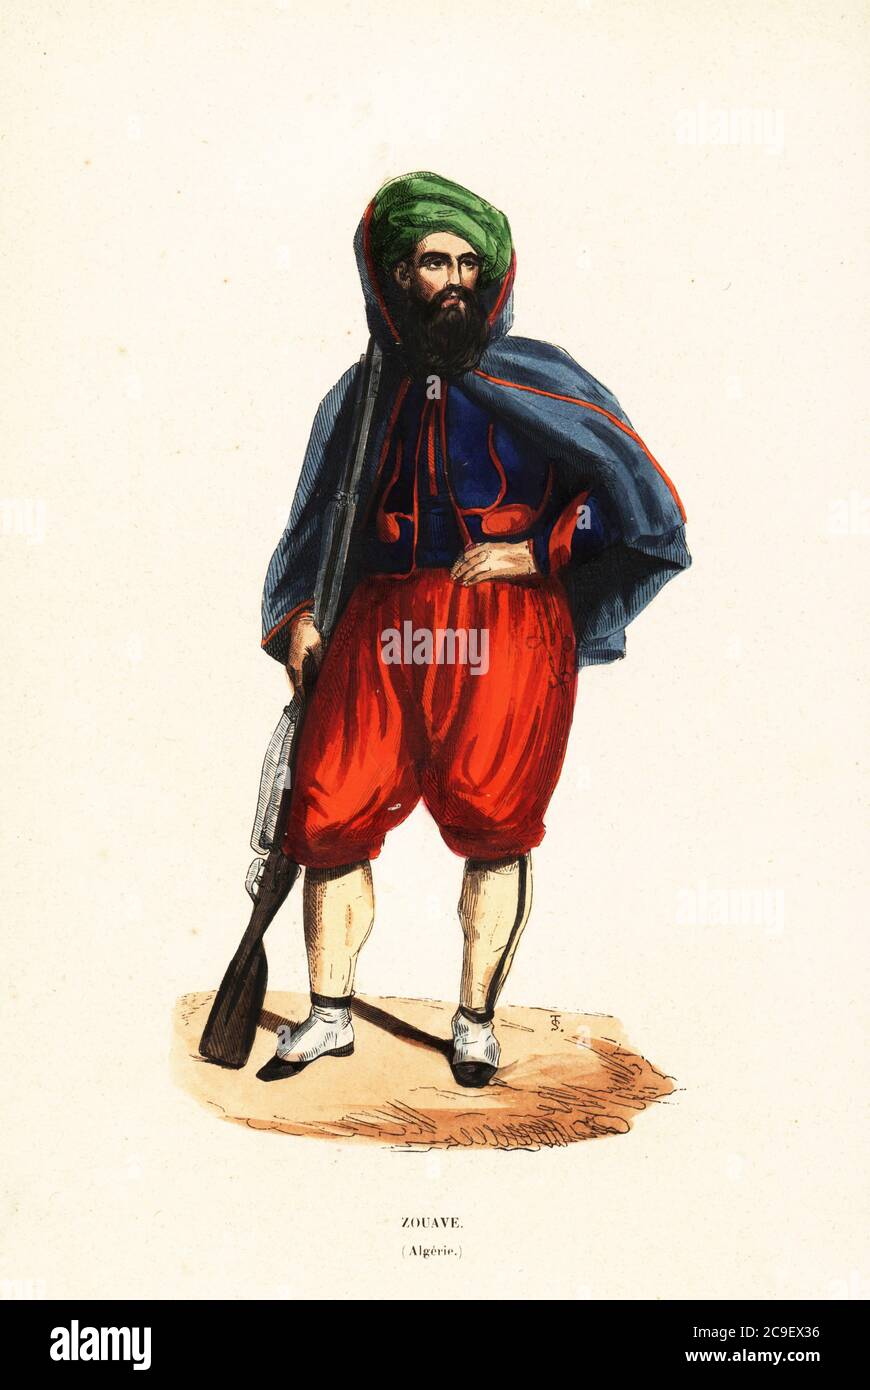 Zouave, or Berber Zwawa soldier, of Algeria with musket. The uniform comprised turban, red culottes, leather gaiters, blue jacket and overcoat with hood. Zouave, Algerie. Handcoloured woodcut from Auguste Wahlen's Moeurs, Usages et Costumes de tous les Peuples du Monde, (Manners, Customs and Costumes of all the People of the World) Librairie Historique-Artistique, Brussels, 1845. Wahlen was the pseudonym of Jean-Francois-Nicolas Loumyer (1801-1875), a writer and archivist with the Heraldic Department of Belgium. Stock Photo